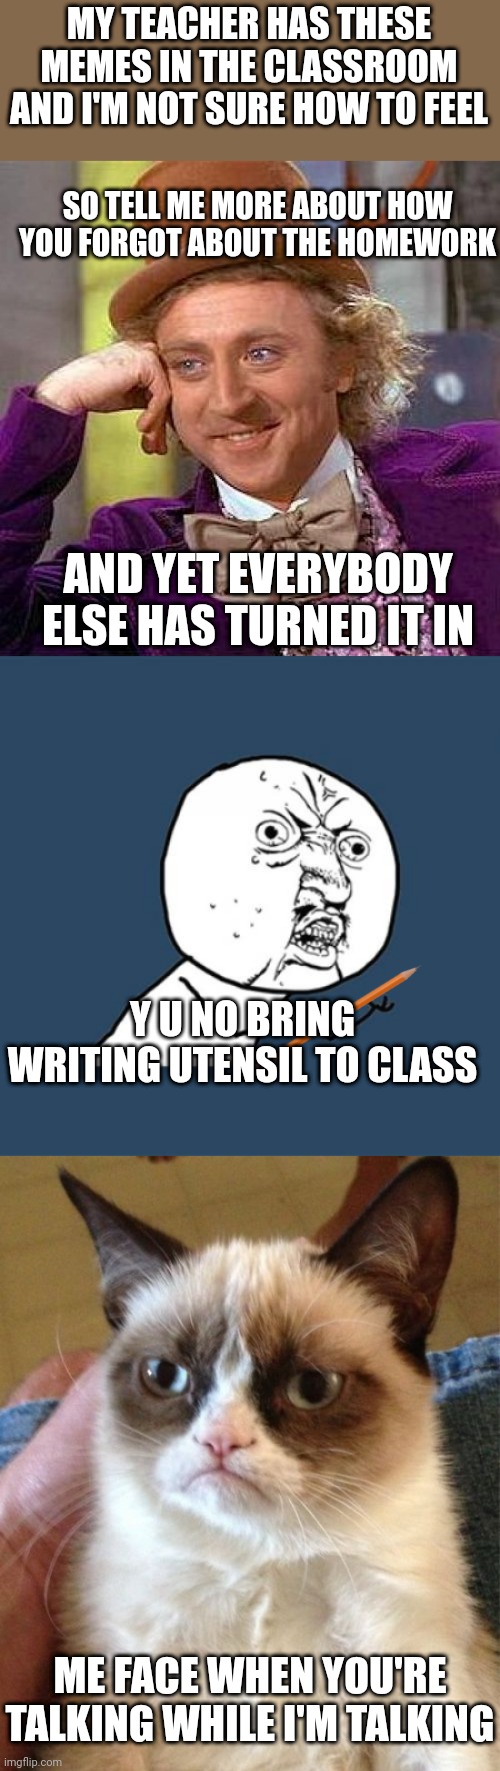 I have mixed emotions about this | MY TEACHER HAS THESE MEMES IN THE CLASSROOM AND I'M NOT SURE HOW TO FEEL; SO TELL ME MORE ABOUT HOW YOU FORGOT ABOUT THE HOMEWORK; AND YET EVERYBODY ELSE HAS TURNED IT IN; Y U NO BRING WRITING UTENSIL TO CLASS; ME FACE WHEN YOU'RE TALKING WHILE I'M TALKING | image tagged in memes,creepy condescending wonka,y u no,grumpy cat | made w/ Imgflip meme maker